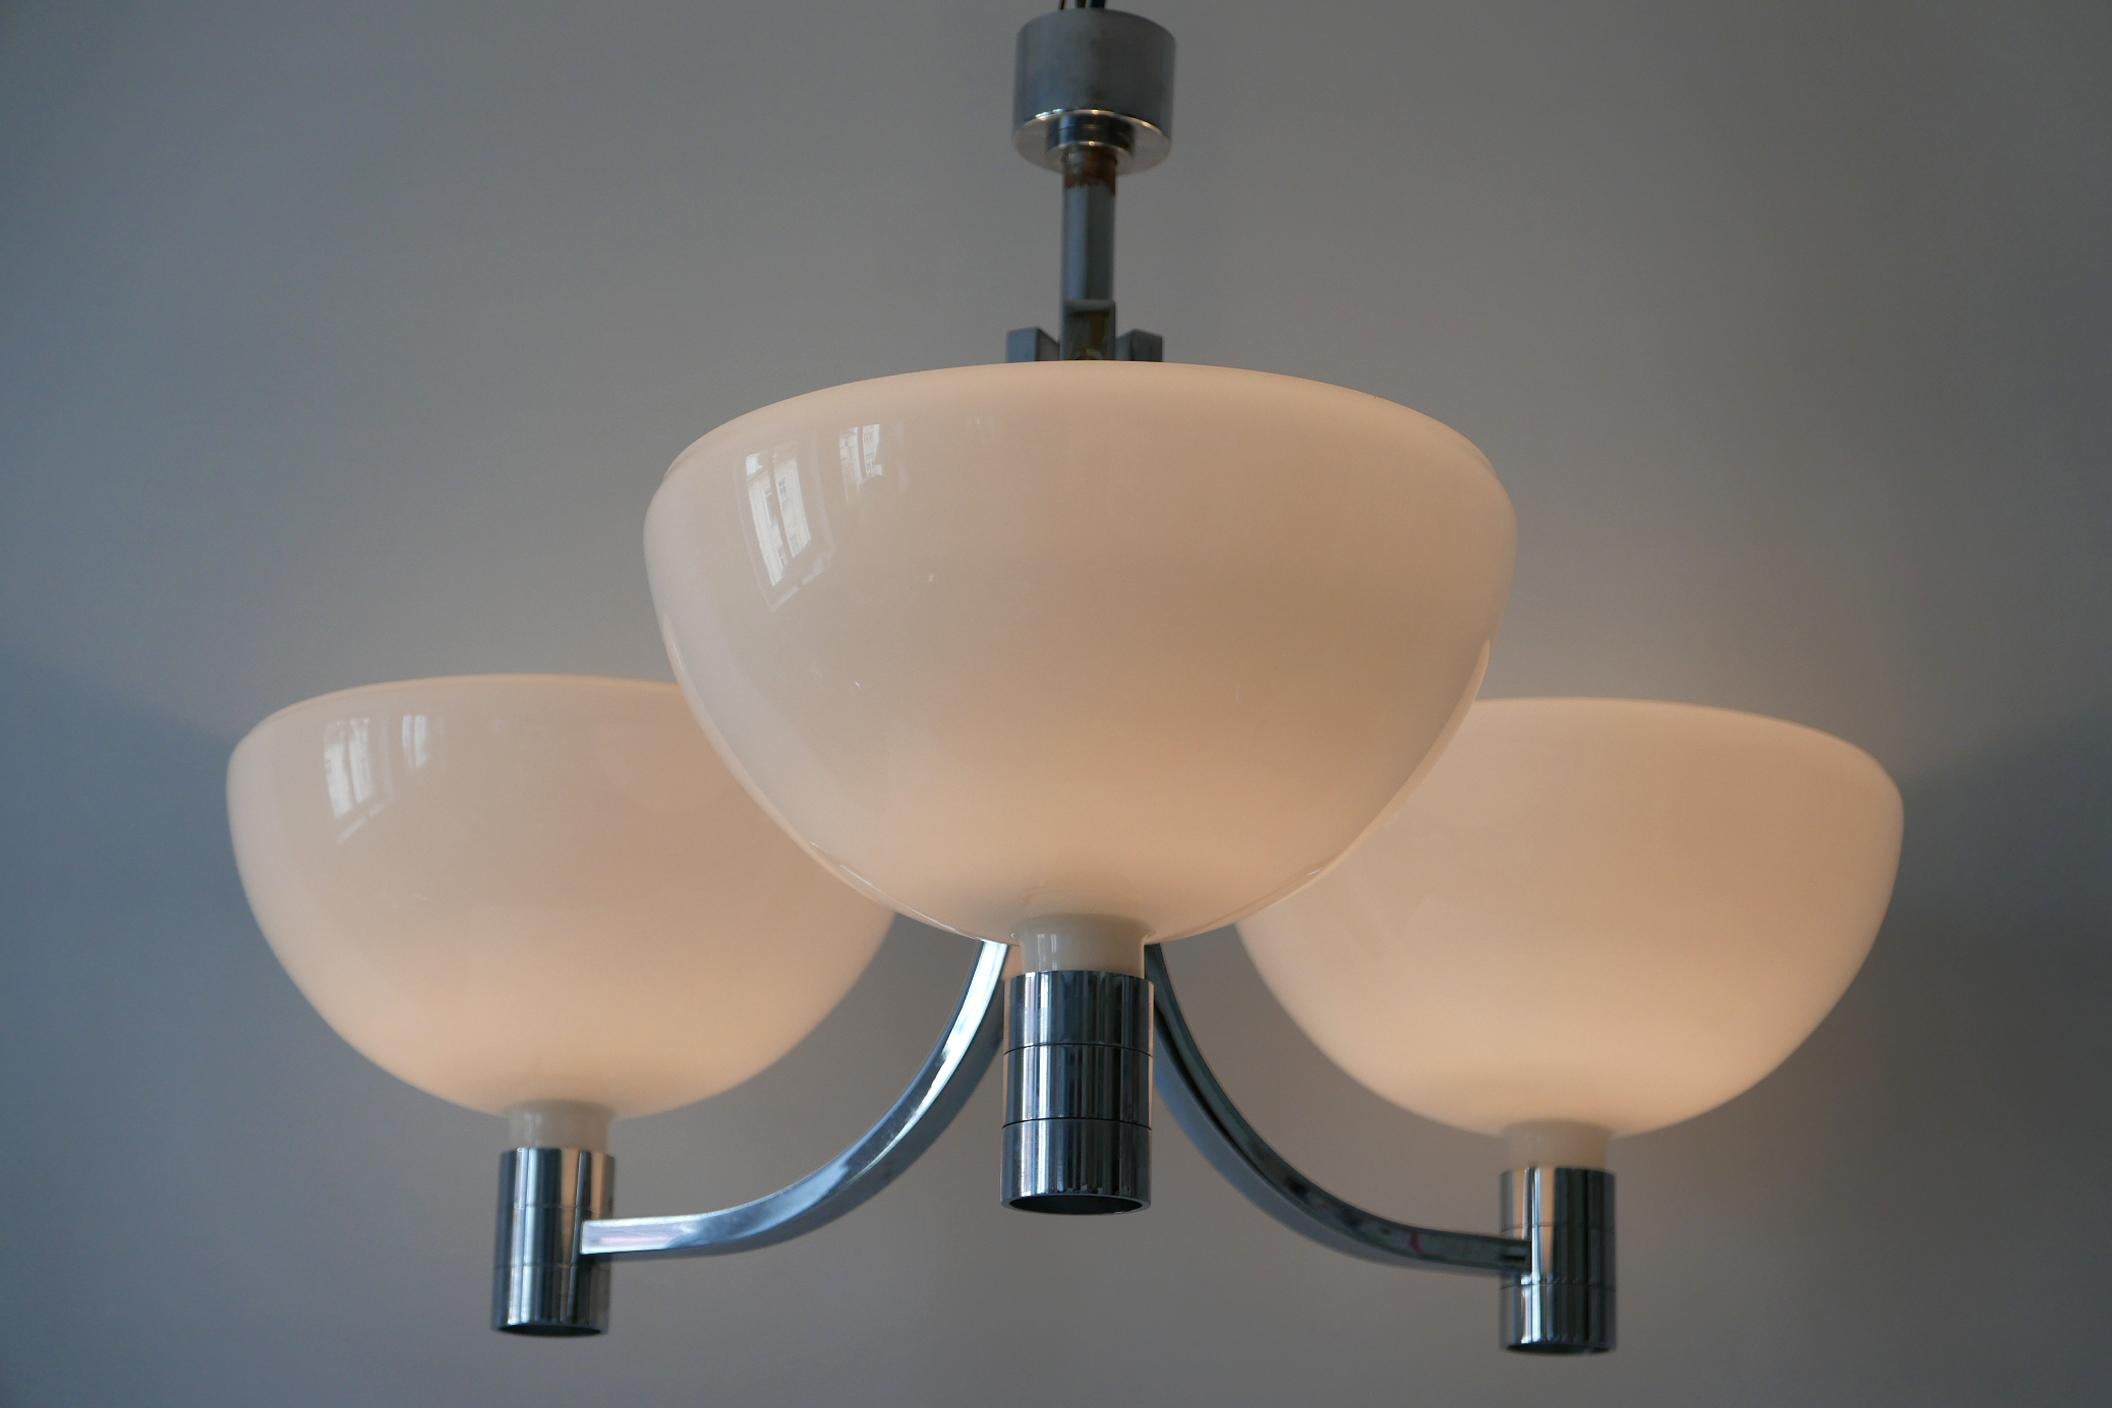 Extremely rare and huge Mid-Century Modern triple AM/AS Series chandelier or pendant lamp. Designed by Franco Albini & Franca Helg for Sirrah, 1969 in Italy.

The lamp shades can be mounted as up or down lighter!

Executed in glossy opaline glass